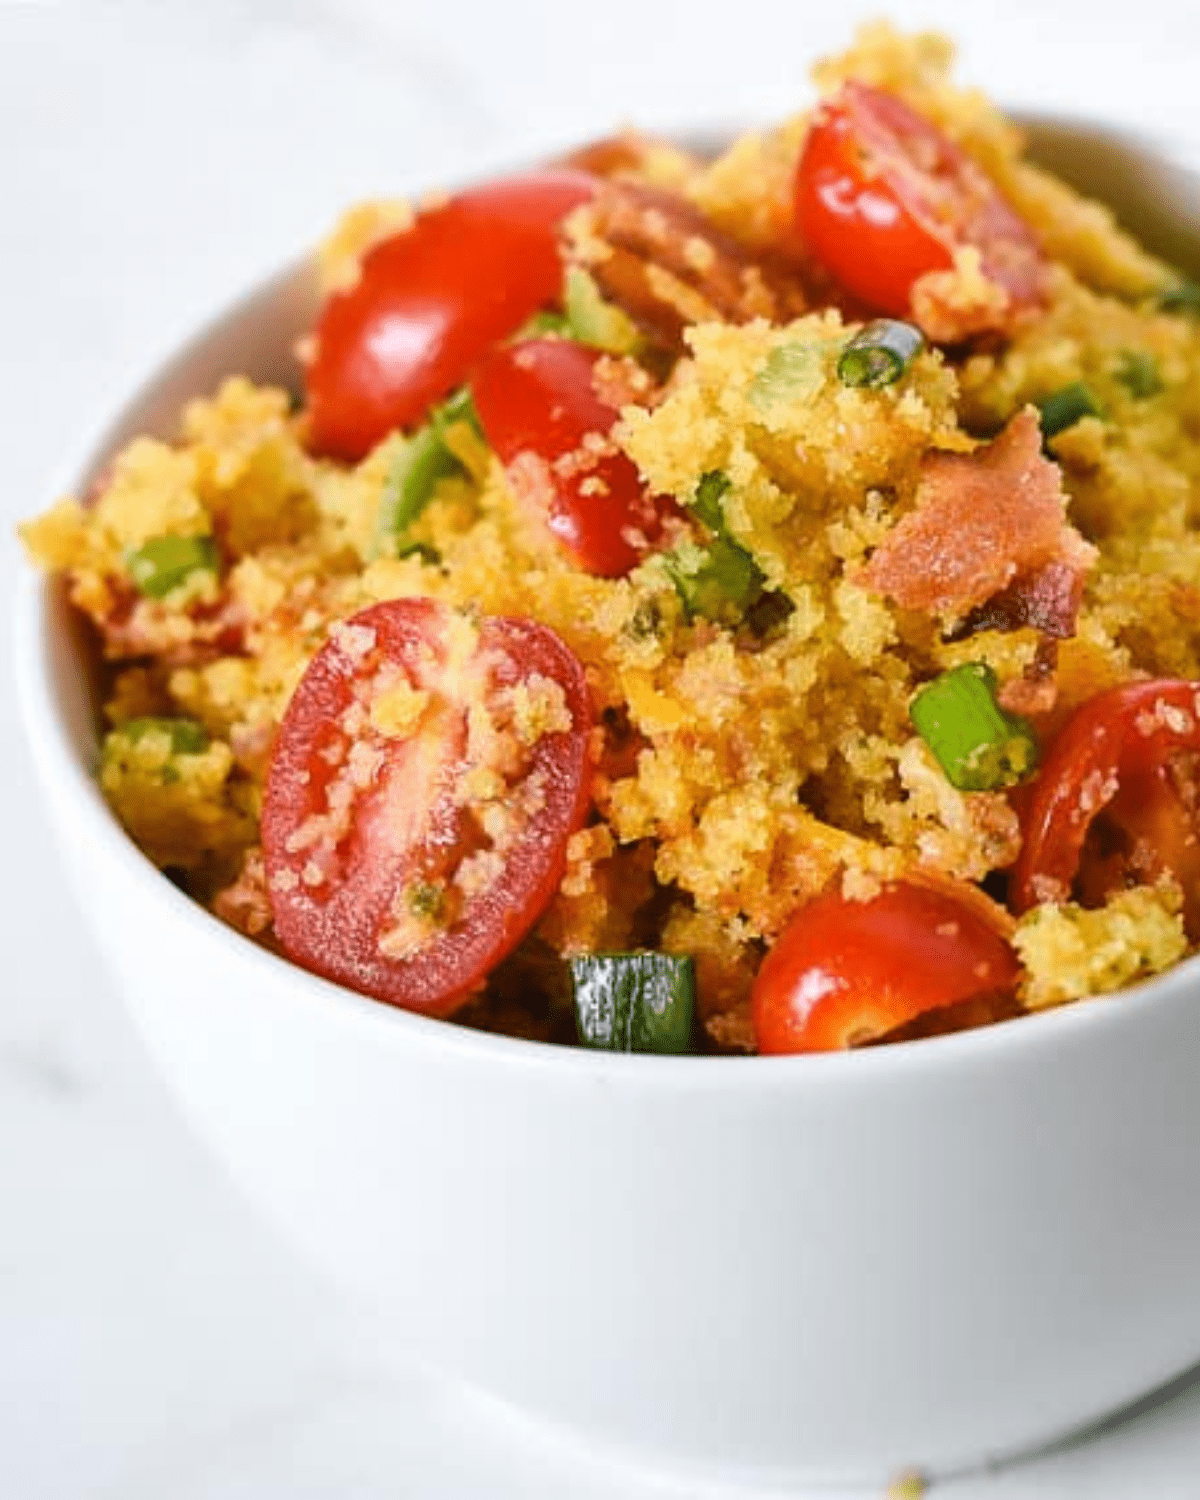 Cornbread salad with tomatoes and green onions